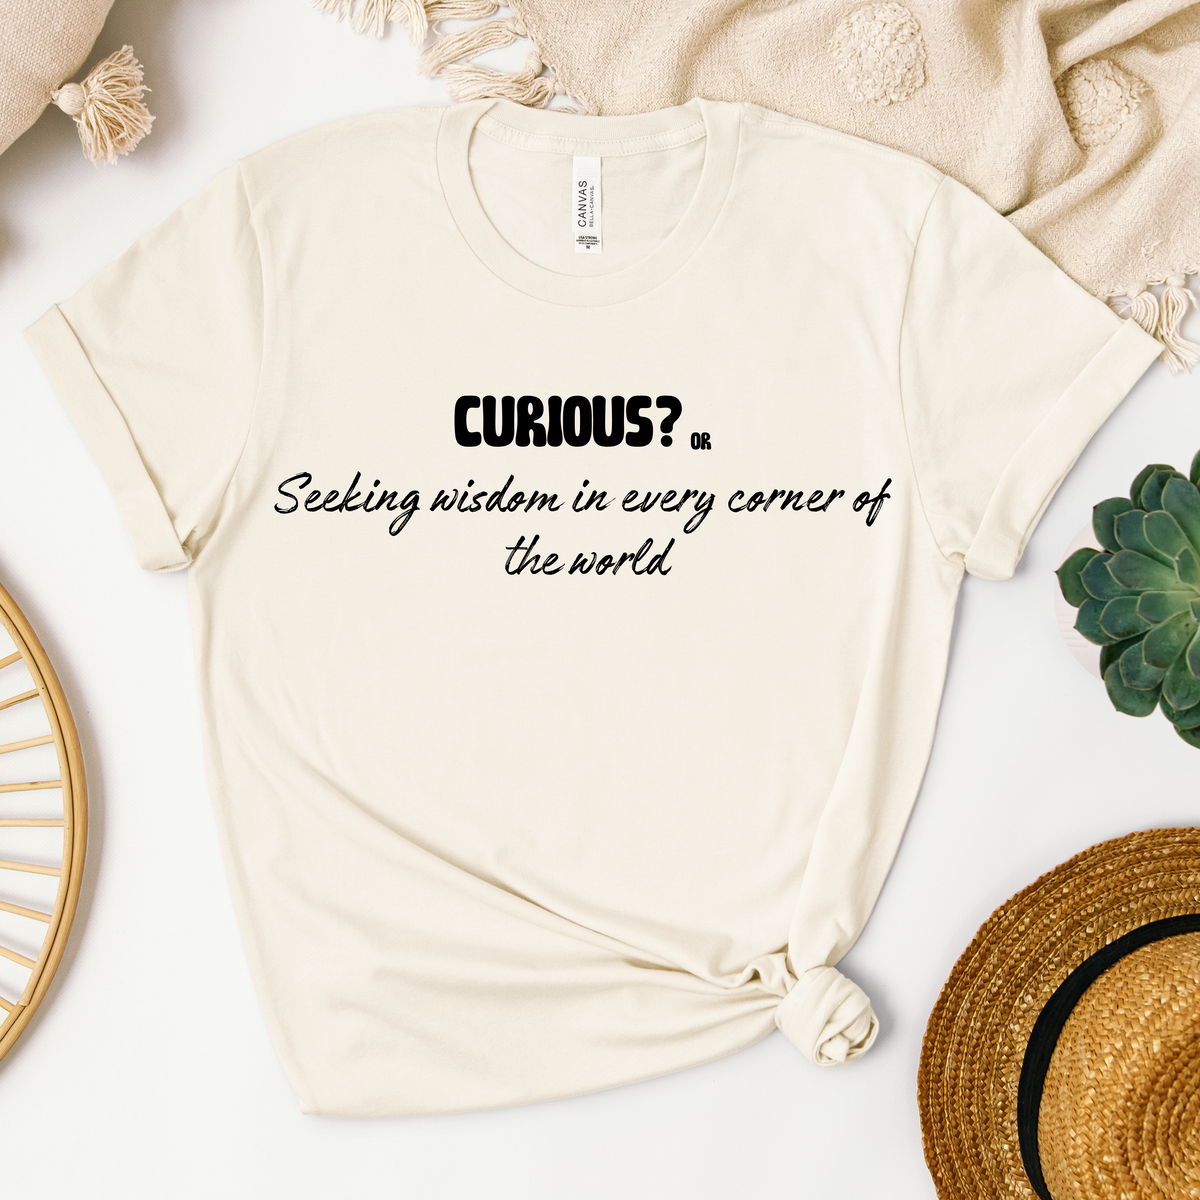 Curious? or Seeking wisdom in every corner of the world T-shirt.